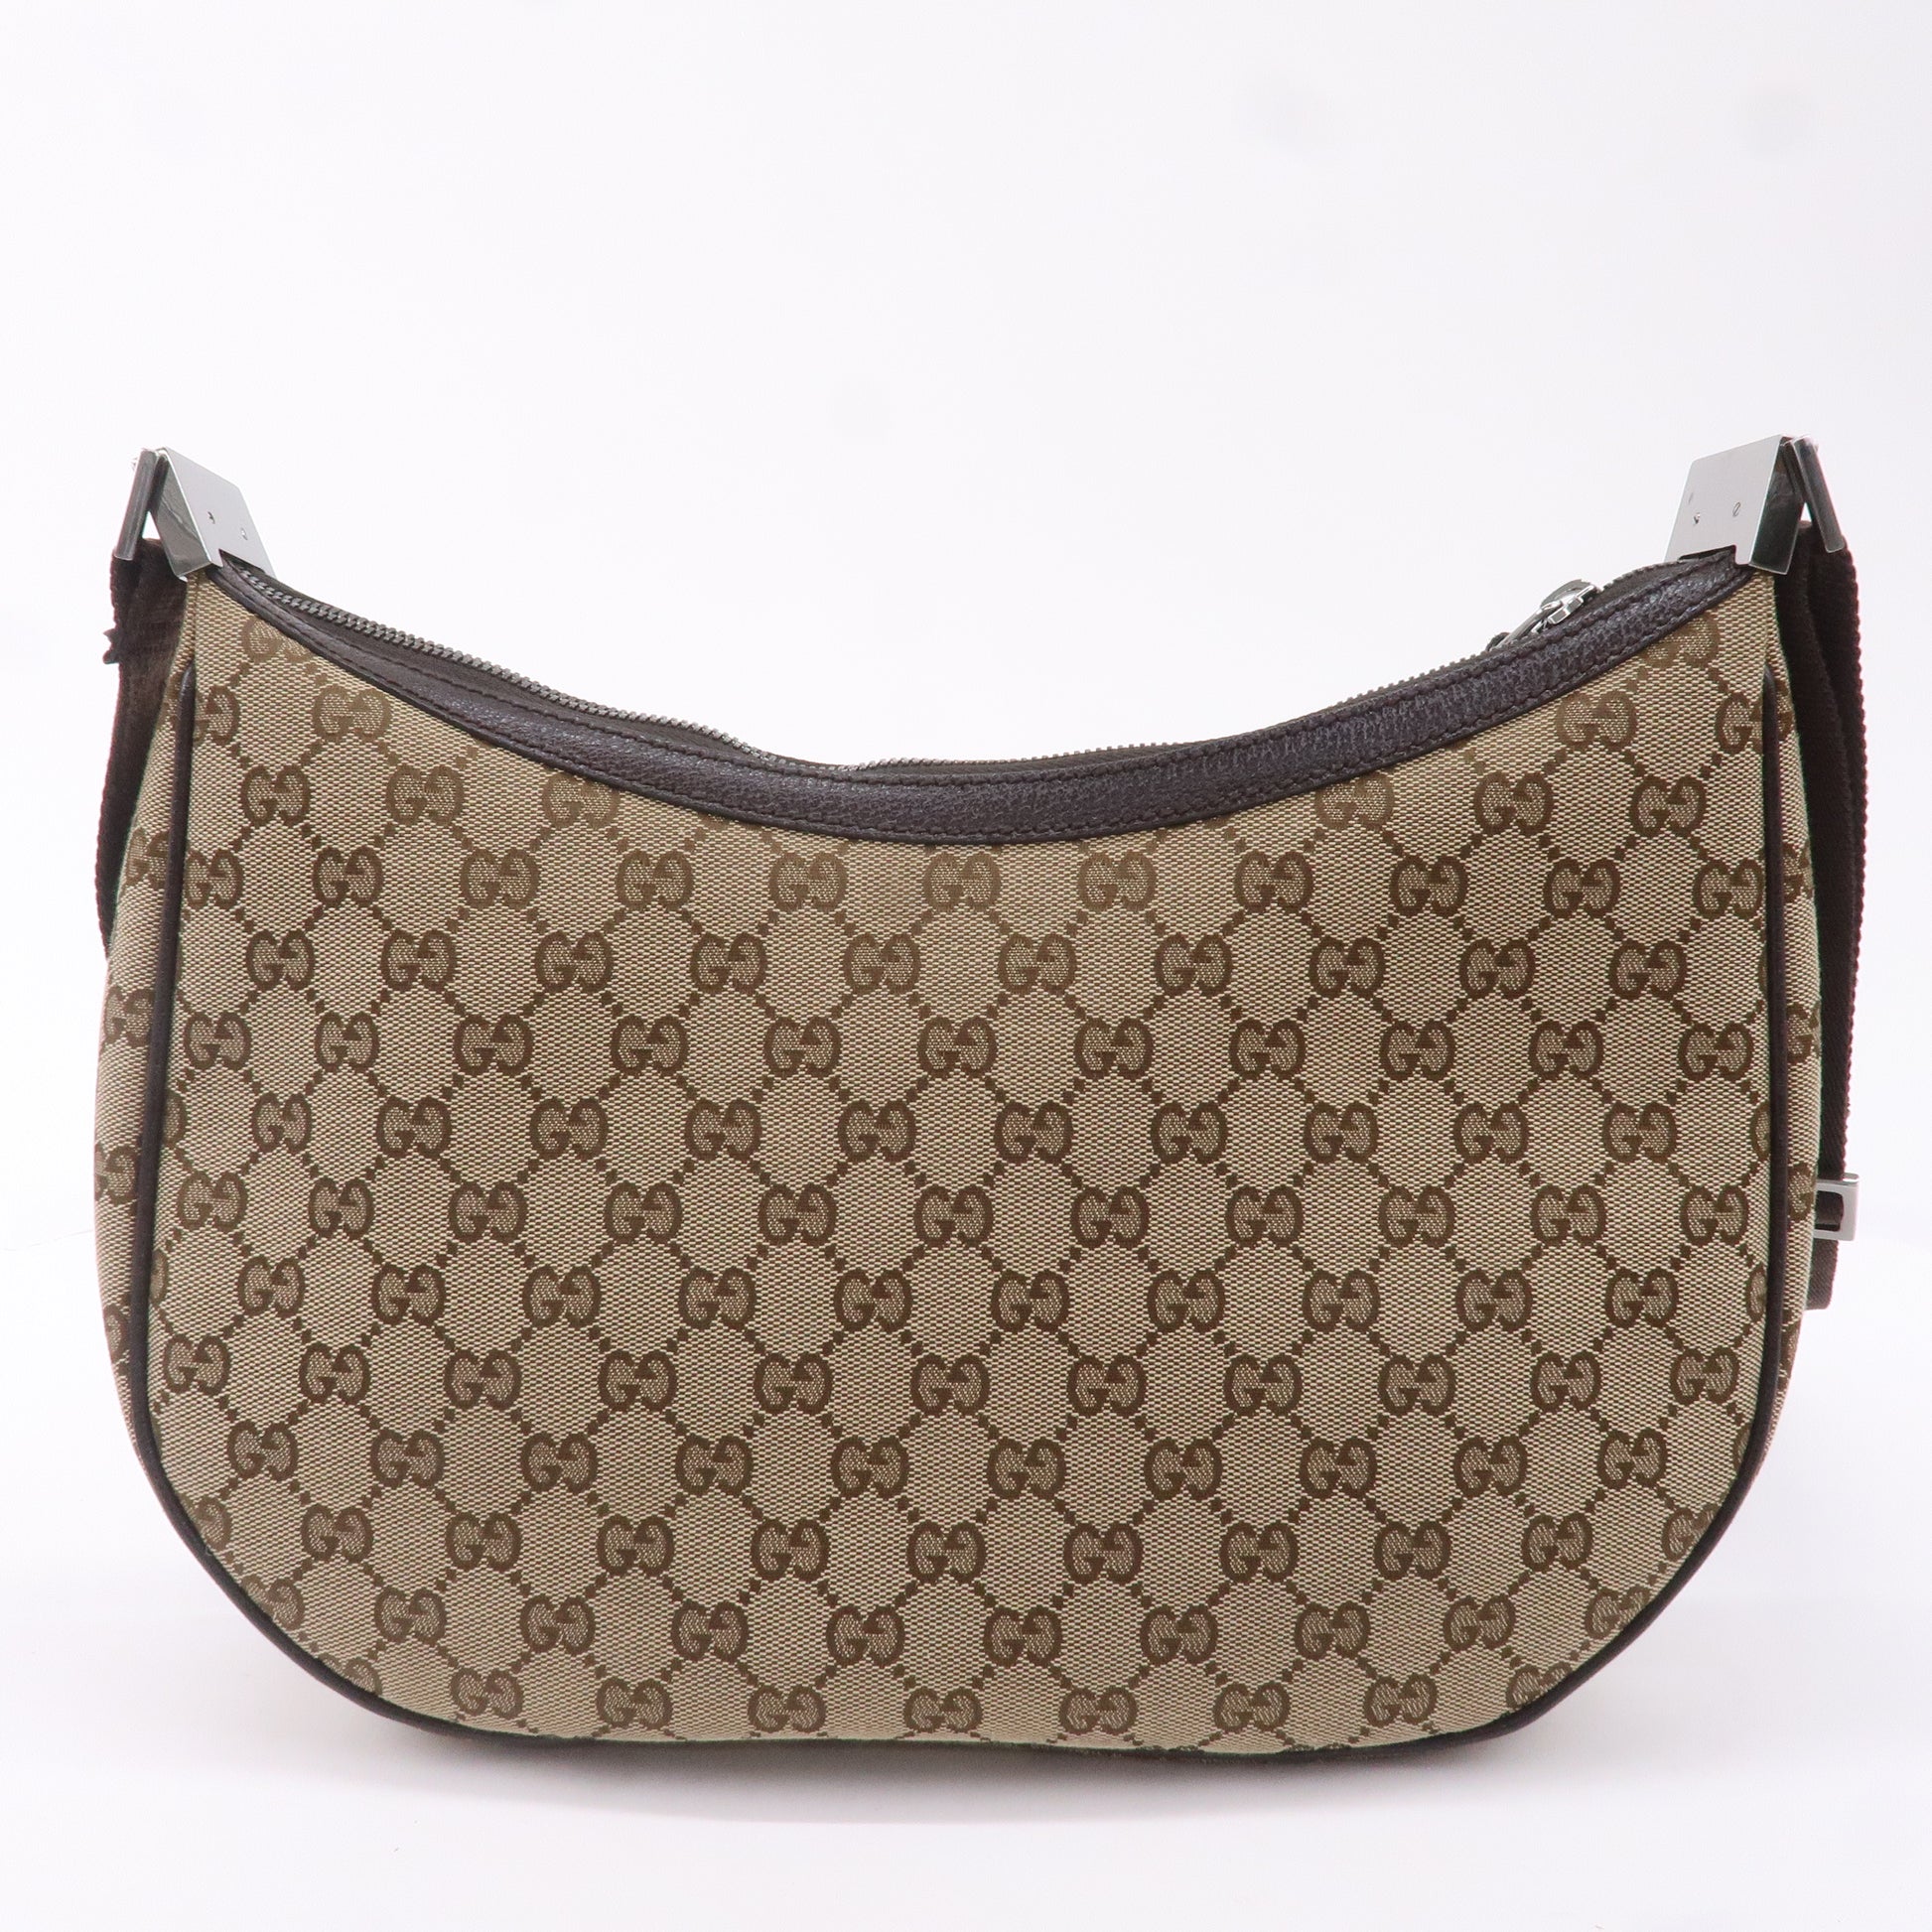 Authentic GUCCI Shoulder Cross Body Bag GG Canvas Leather 122790